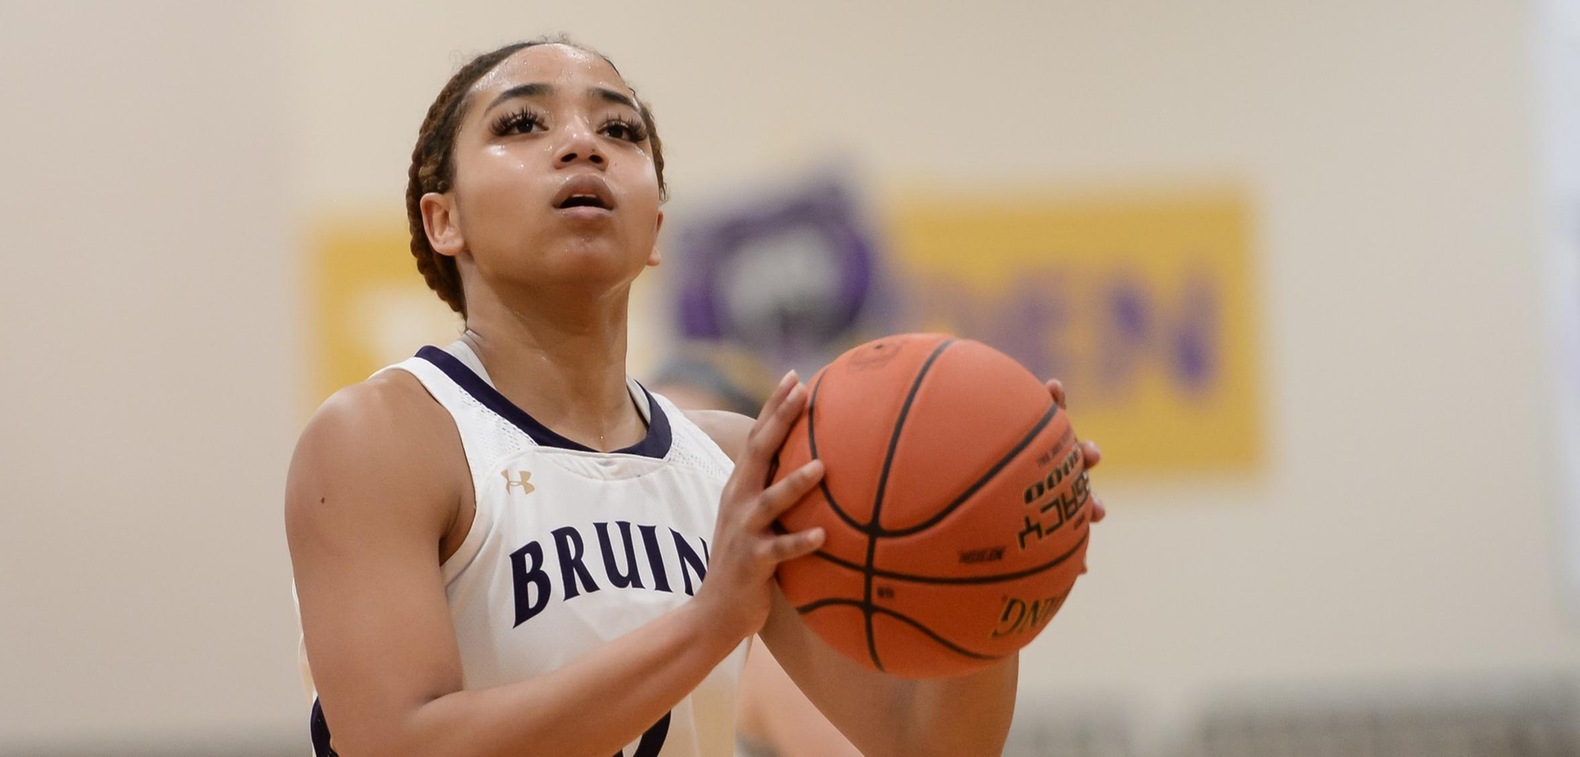 Asha Scott led the Bruins with 18 points, 10 rebounds, four assists, and three steals.